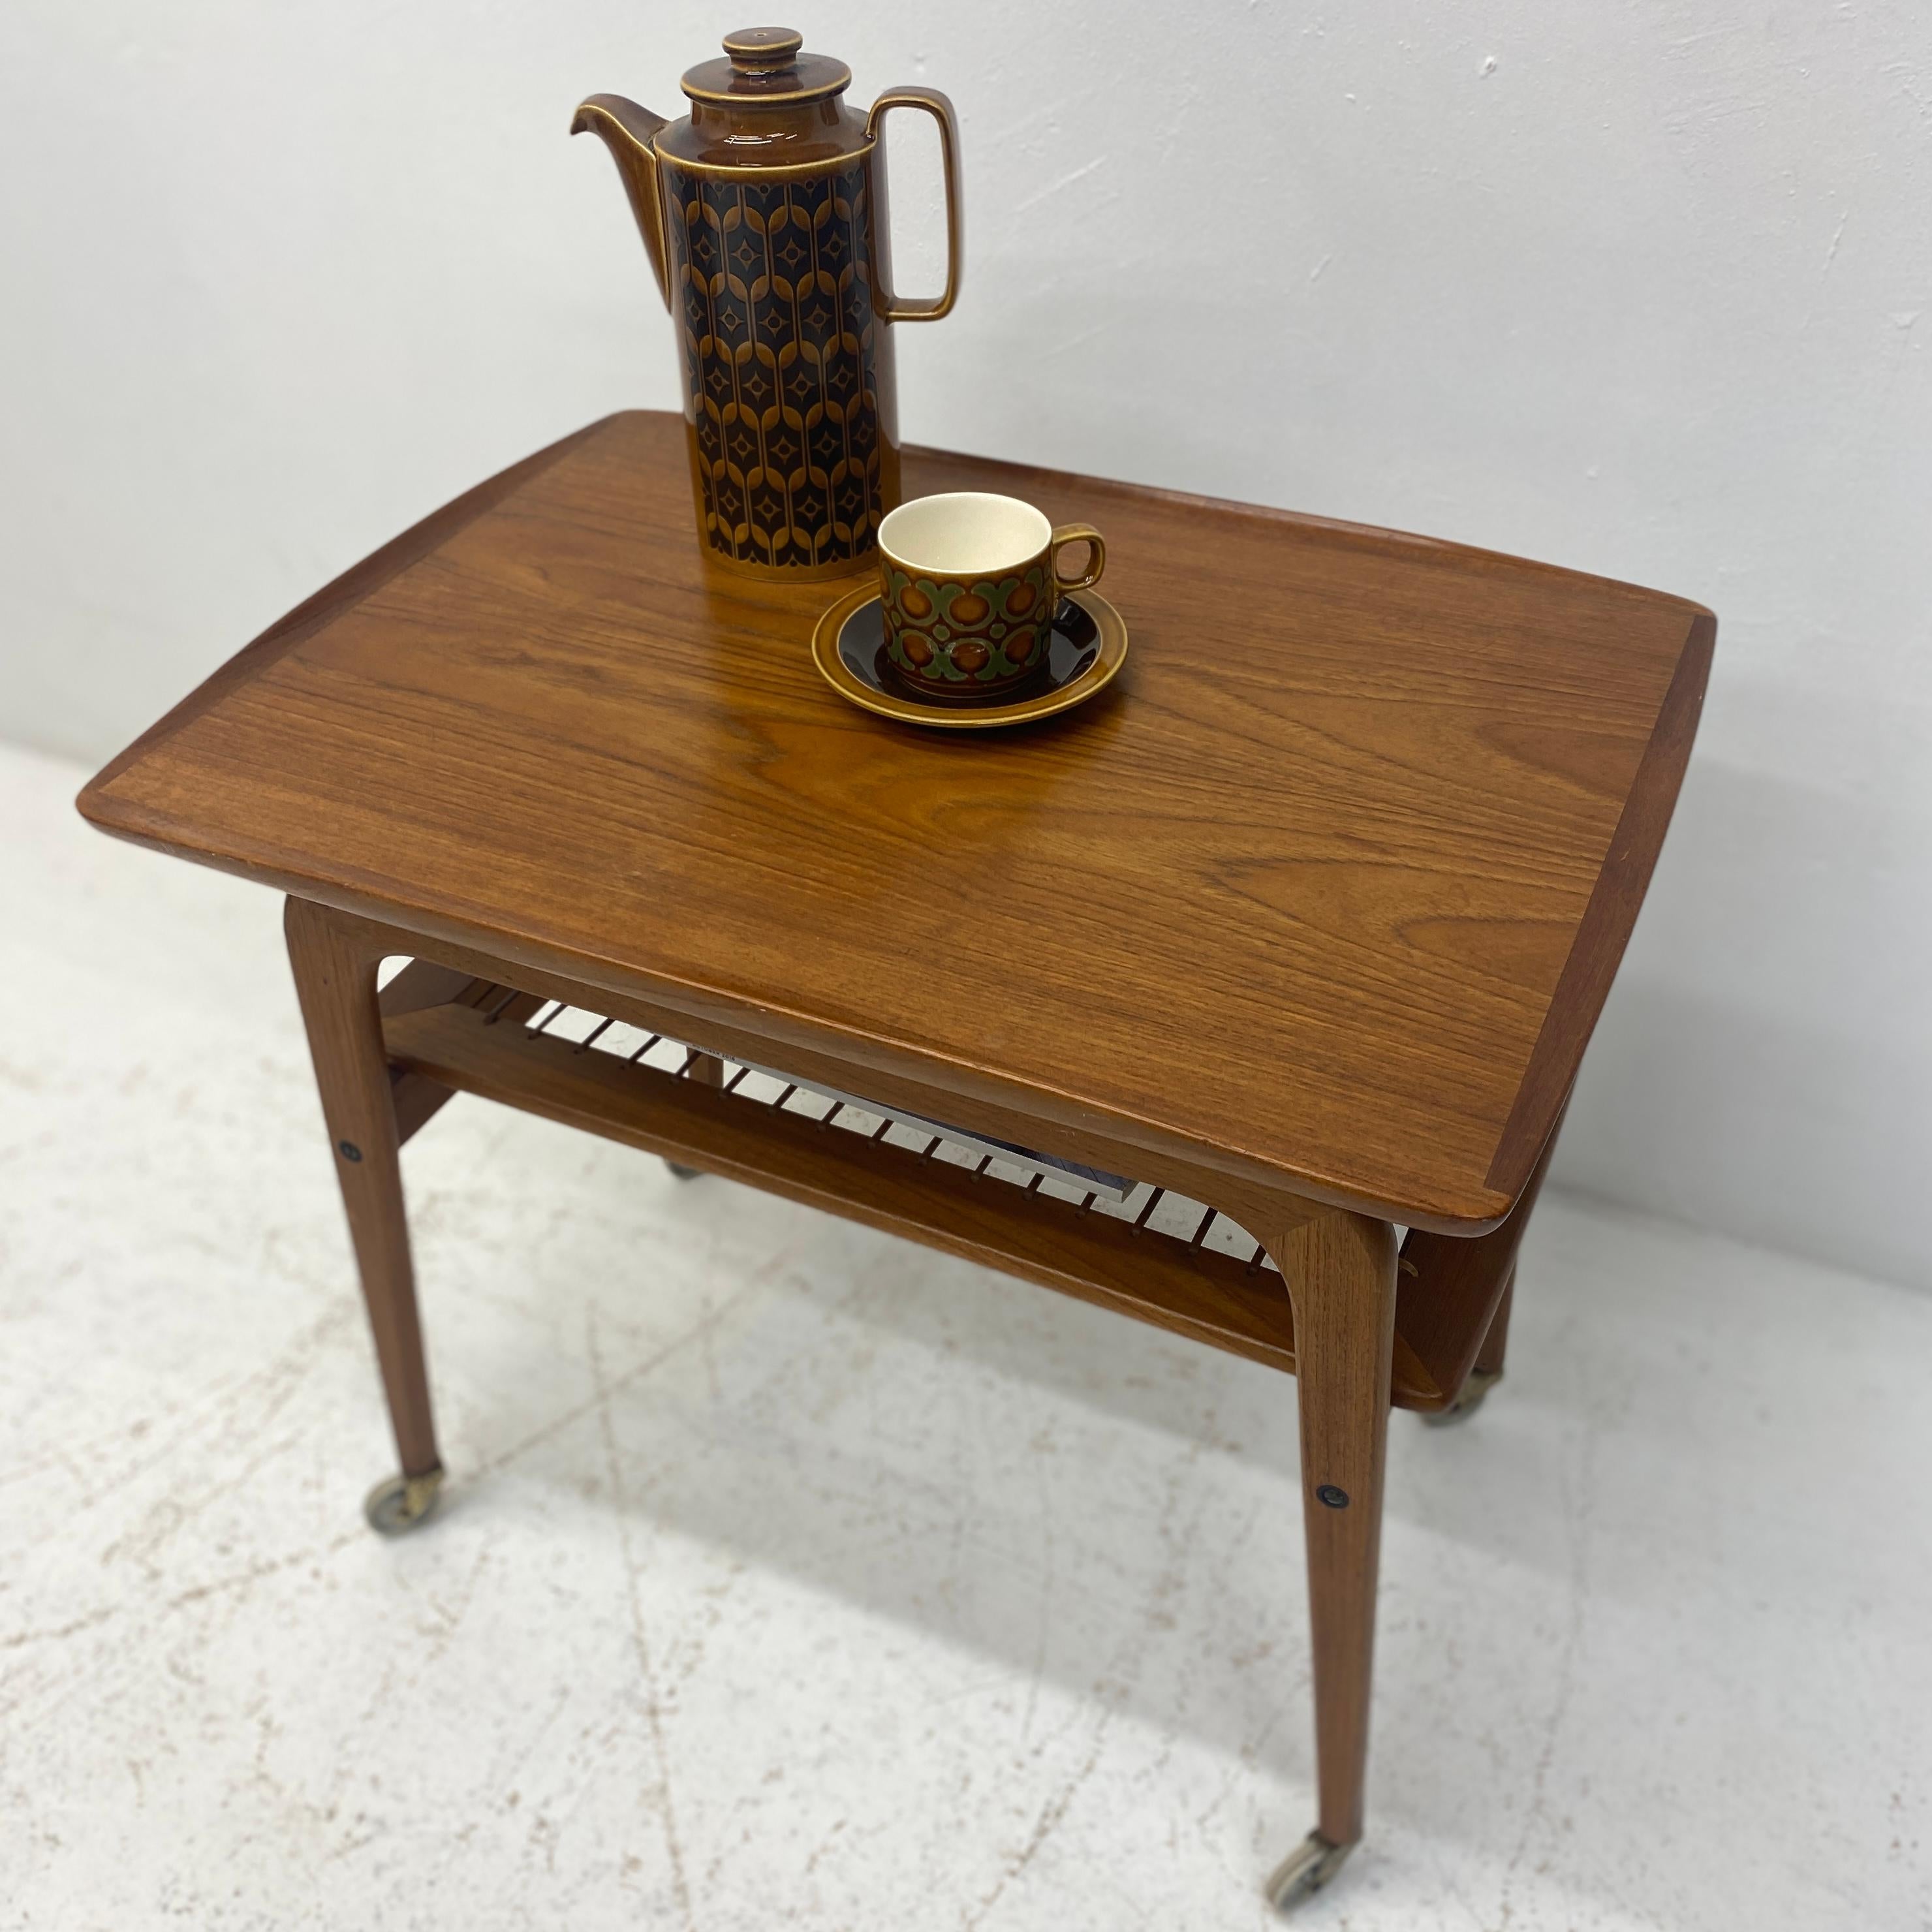 A superb Danish Johannes Anderson midcentury trolley or side table. The trolley is a stunning design with great curves & a beautiful shape. It is constructed from teak & rattan & is therefore very tactile. It sits on its original castors so can